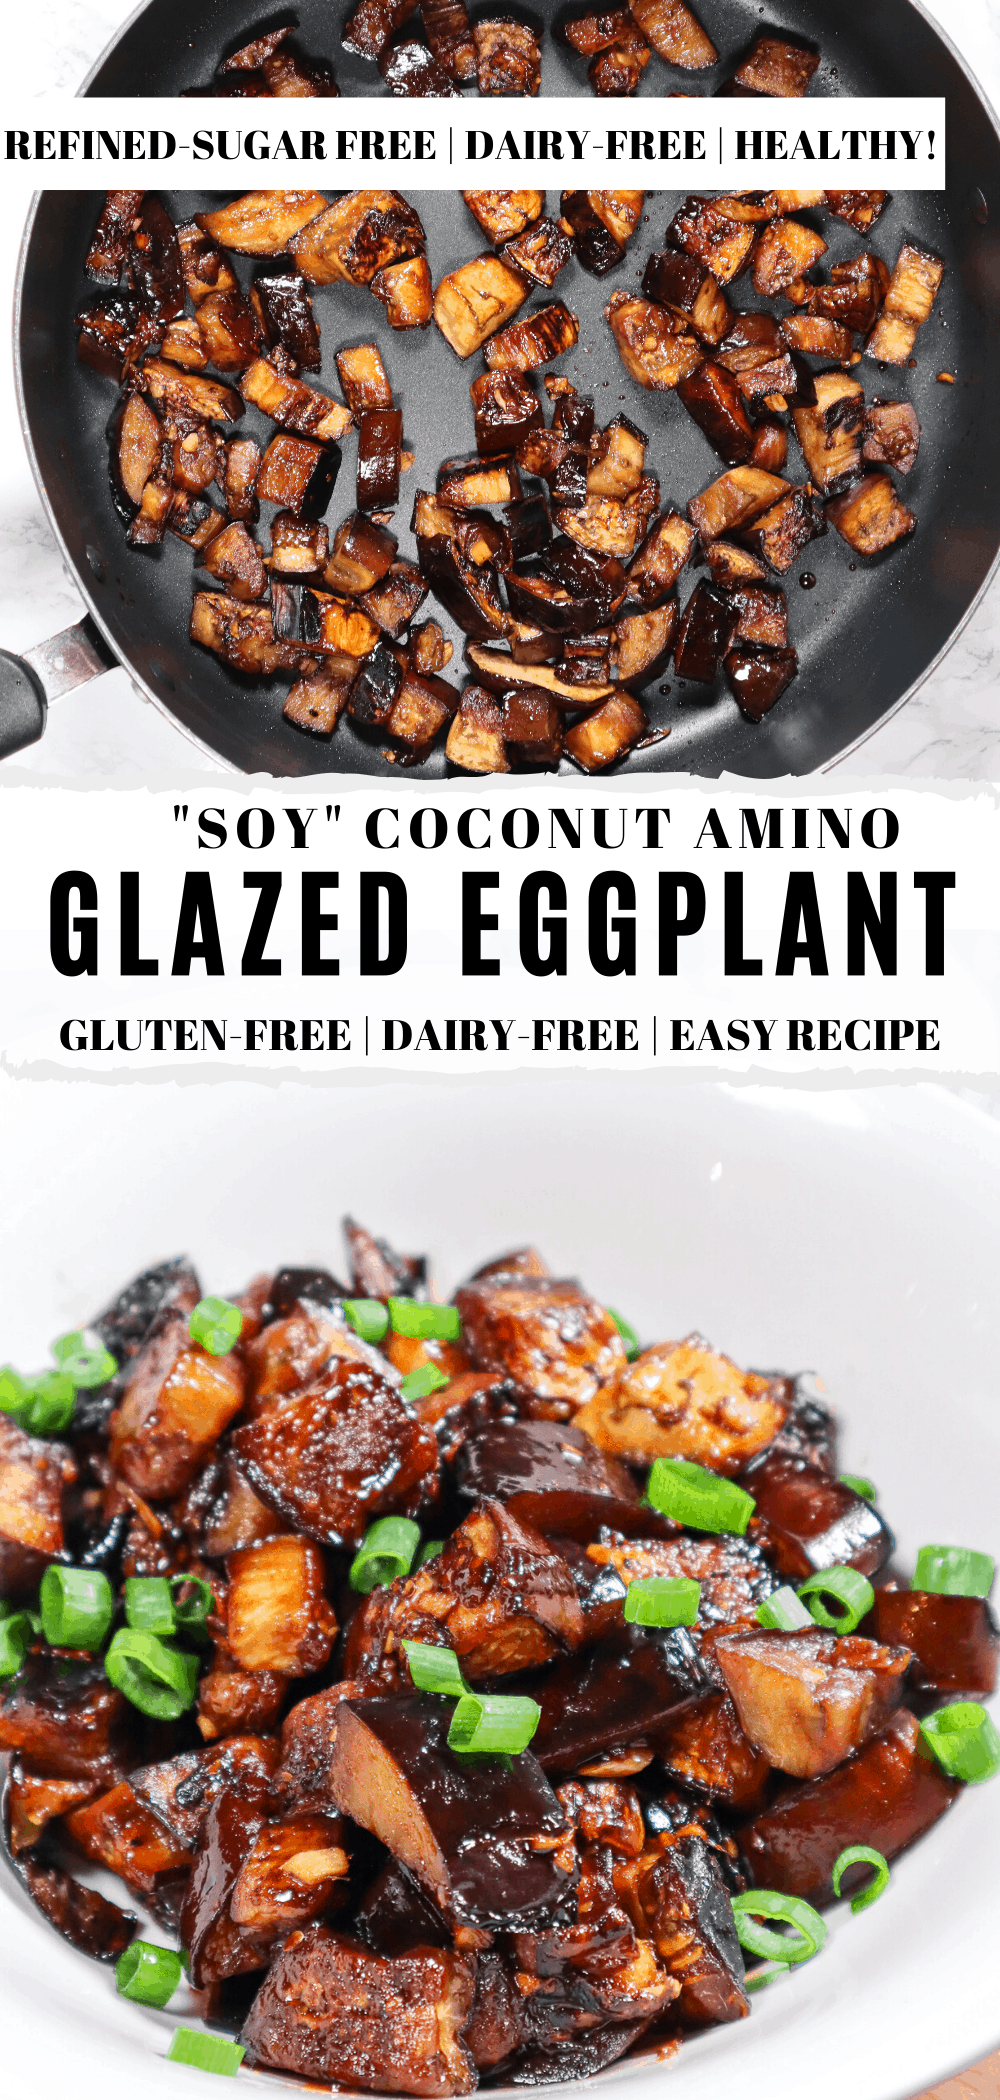 sticy glazed eggplant in the top half of the photo and a bowl of cooked eggplant topped with green onions in the bottom photo, text that divides the photos reads "Soy" Coconut Amino Glazed Eggplant gluten-free dairy-free easy recipe